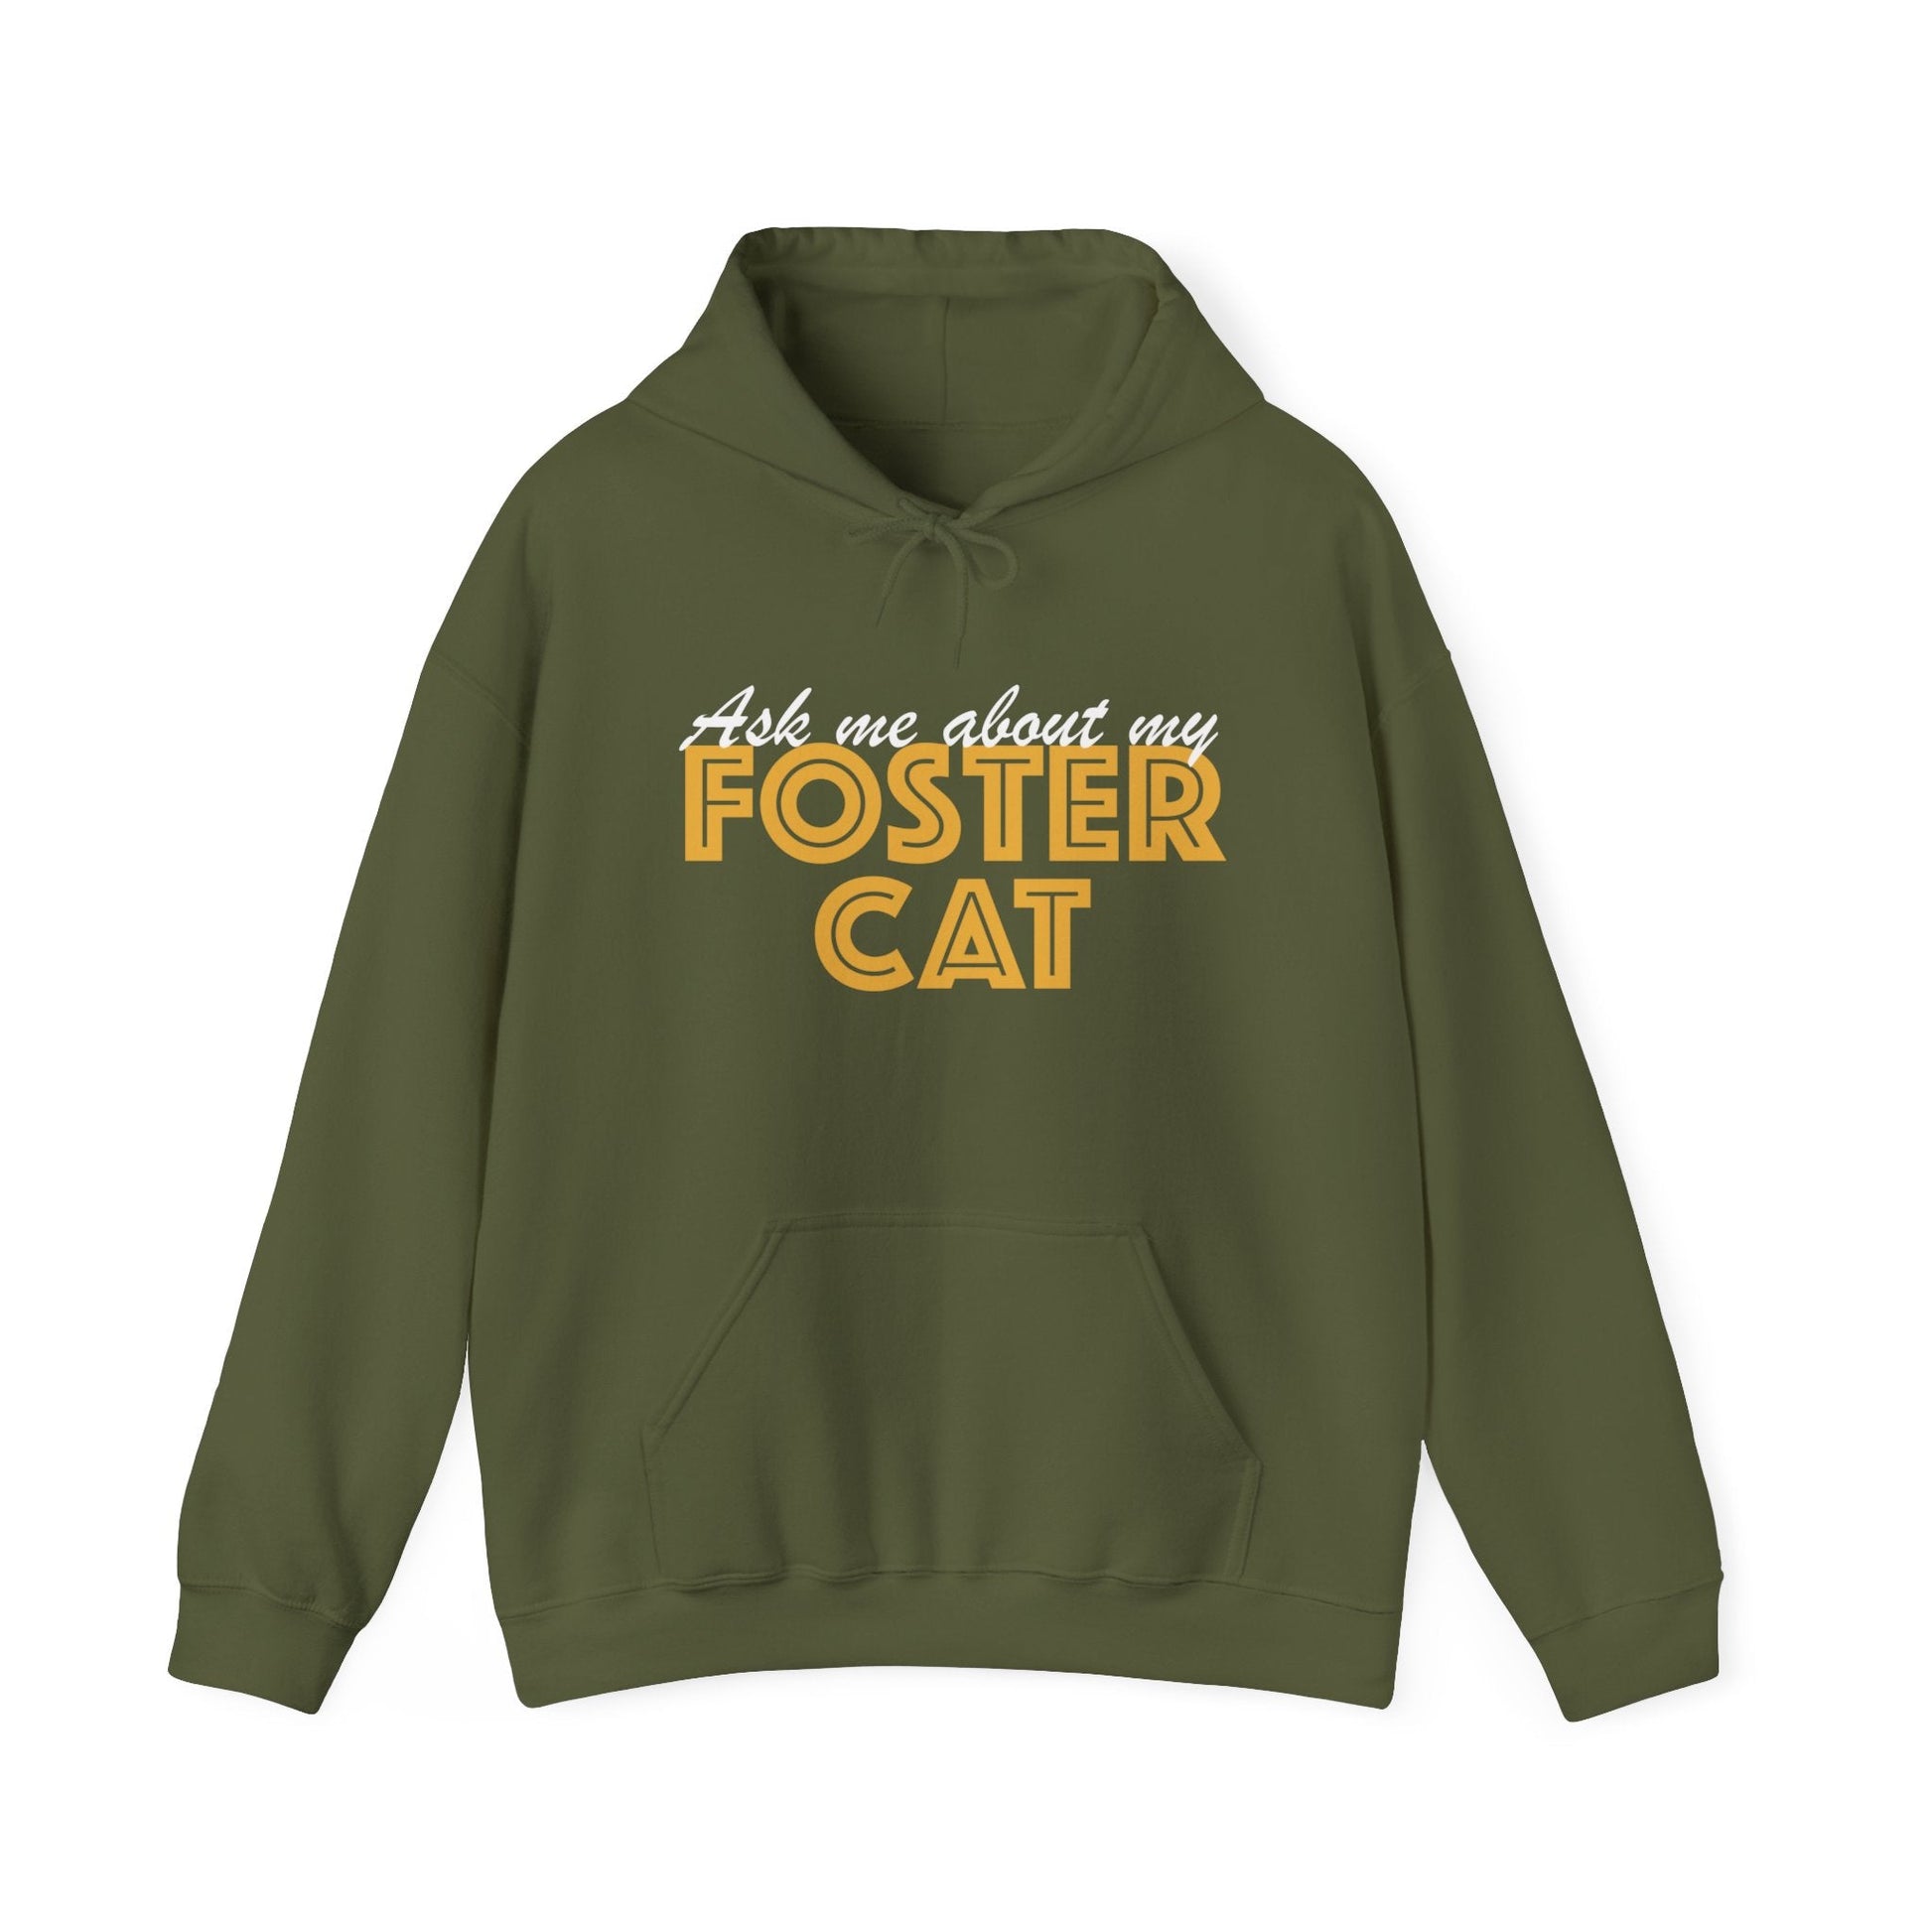 Ask Me About My Foster Cat | Hooded Sweatshirt - Detezi Designs-30583741712146385869